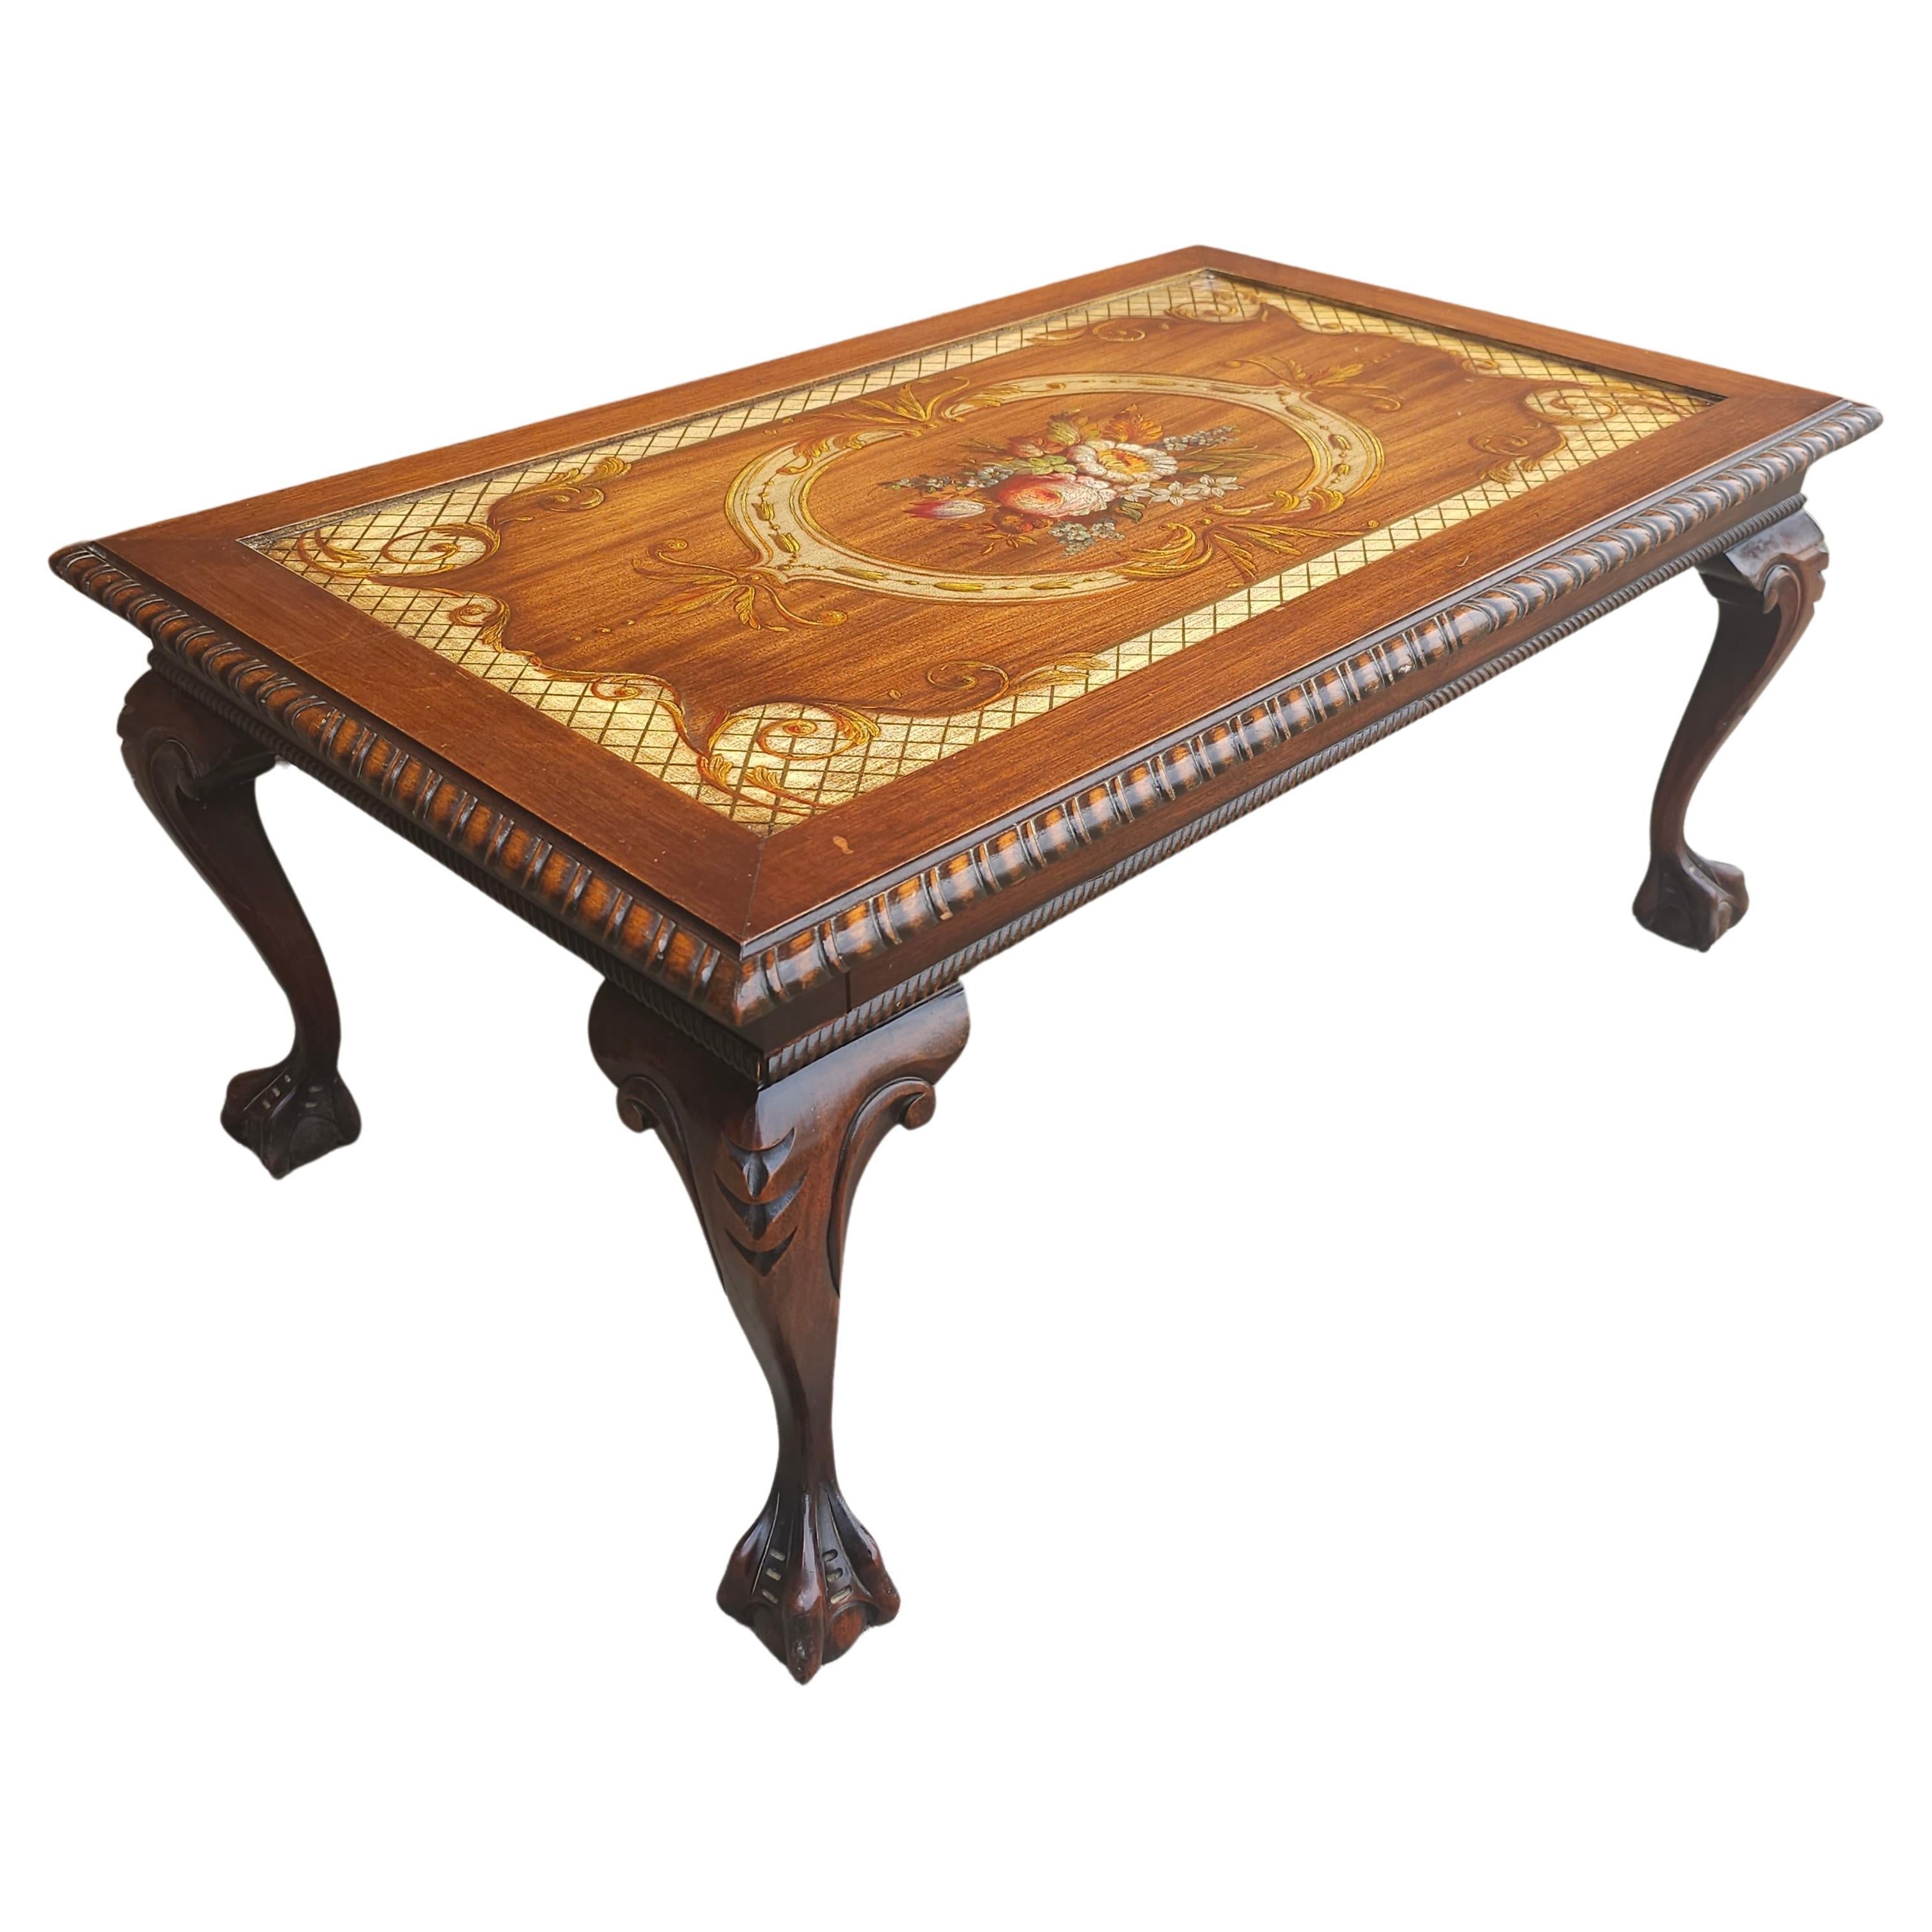 Mid Century Chippendale Carved and Ornate Mahogany  and Glass Inset Coffee Table with carved cabriole legs terminating with ball and claw feet,  in great vintage condition. Measures 35